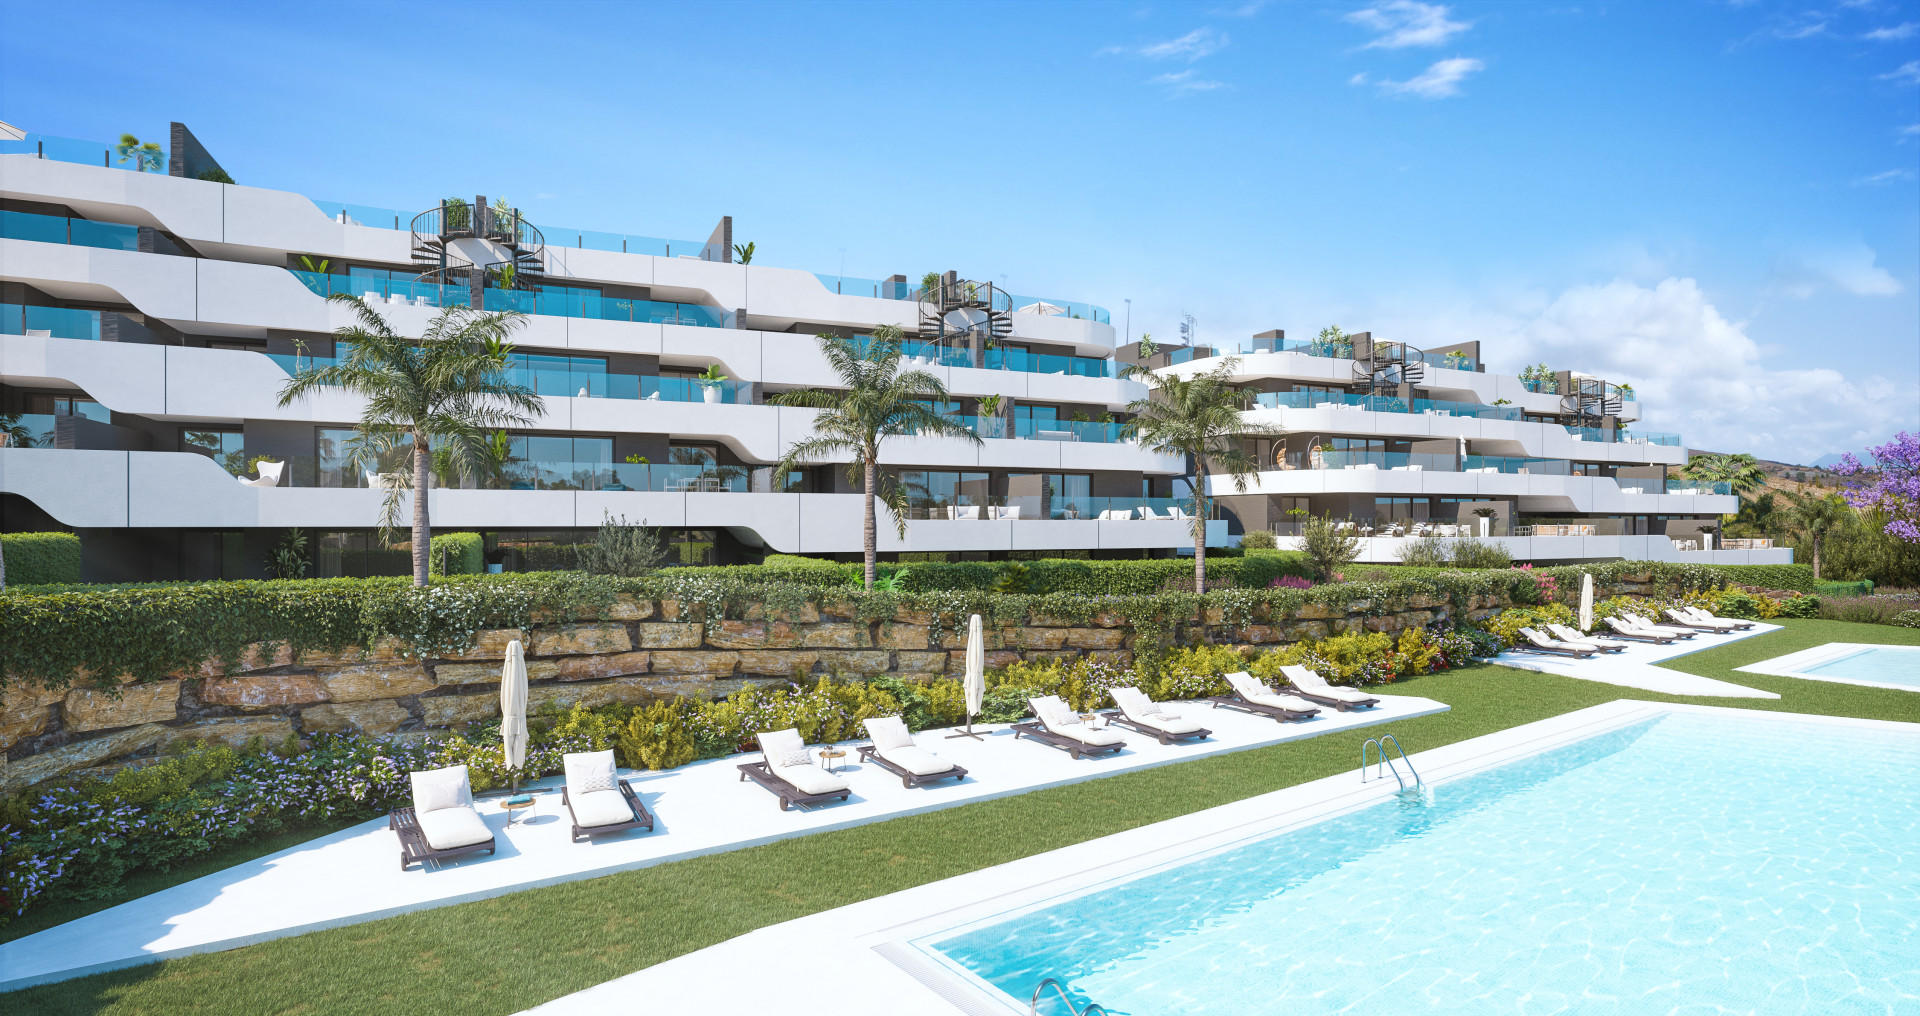 Oasis 325 Phase II: 2 and 3 bedroom apartments in the area of La Resina, Estepona. | Image 0